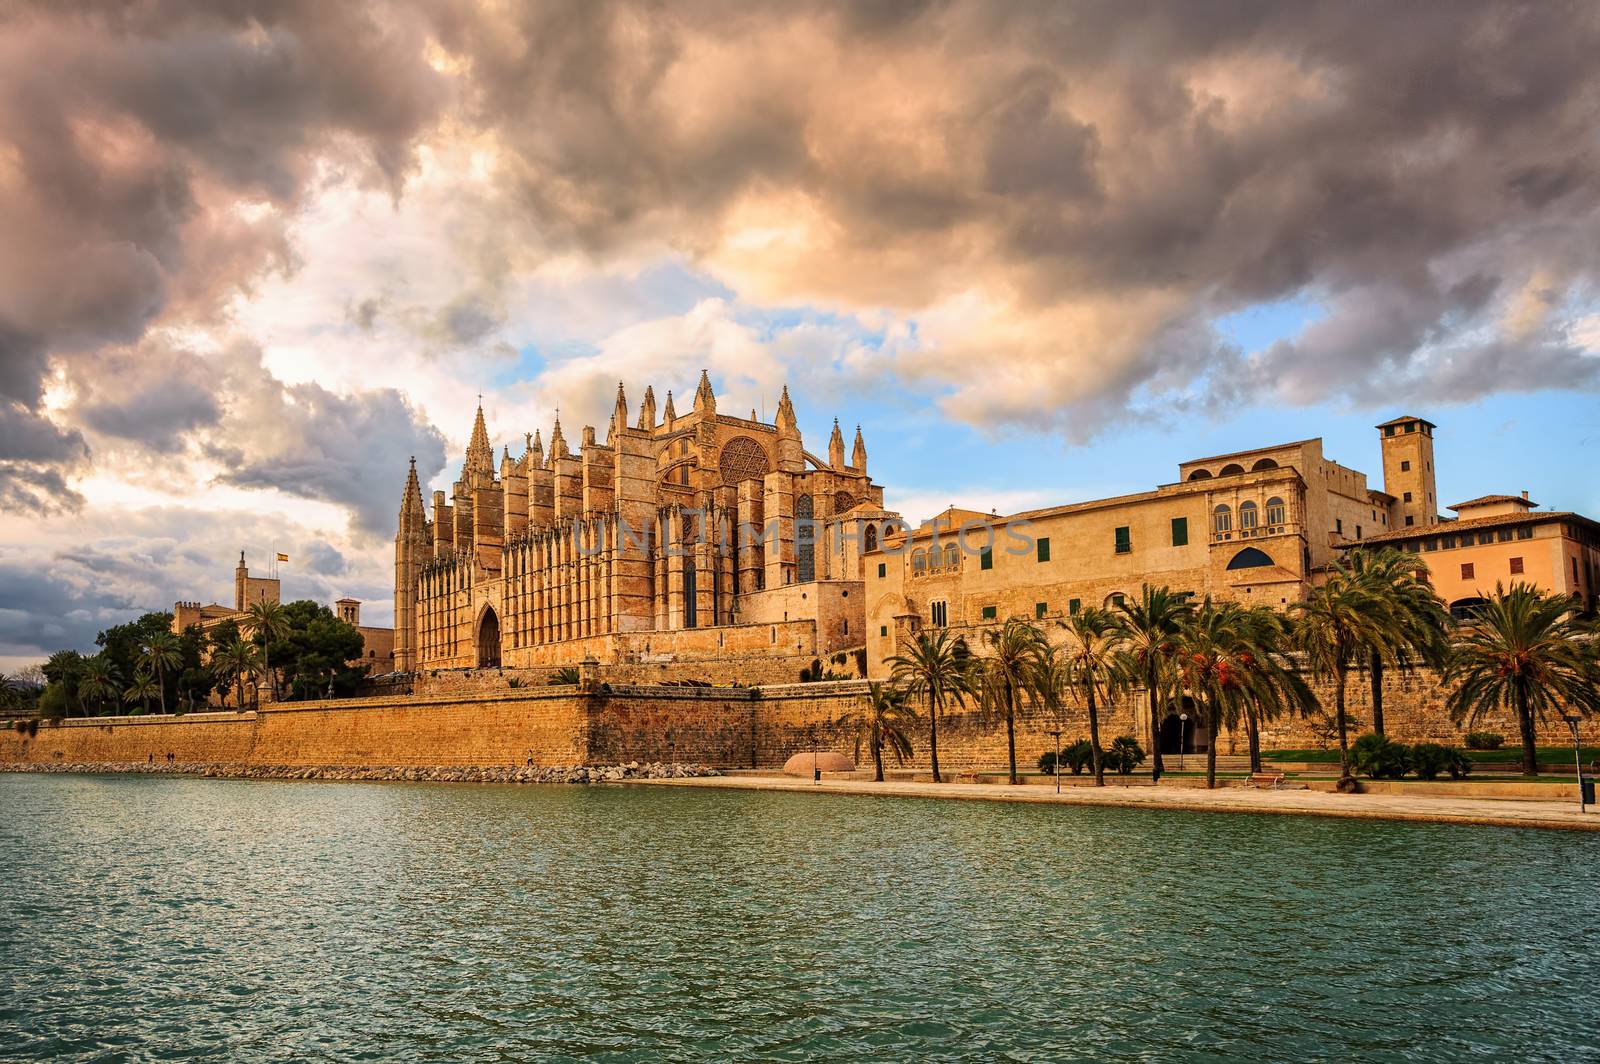 Sunset over medieval gothic La Seu, the cathedral of Palma de Mallorca, Spain